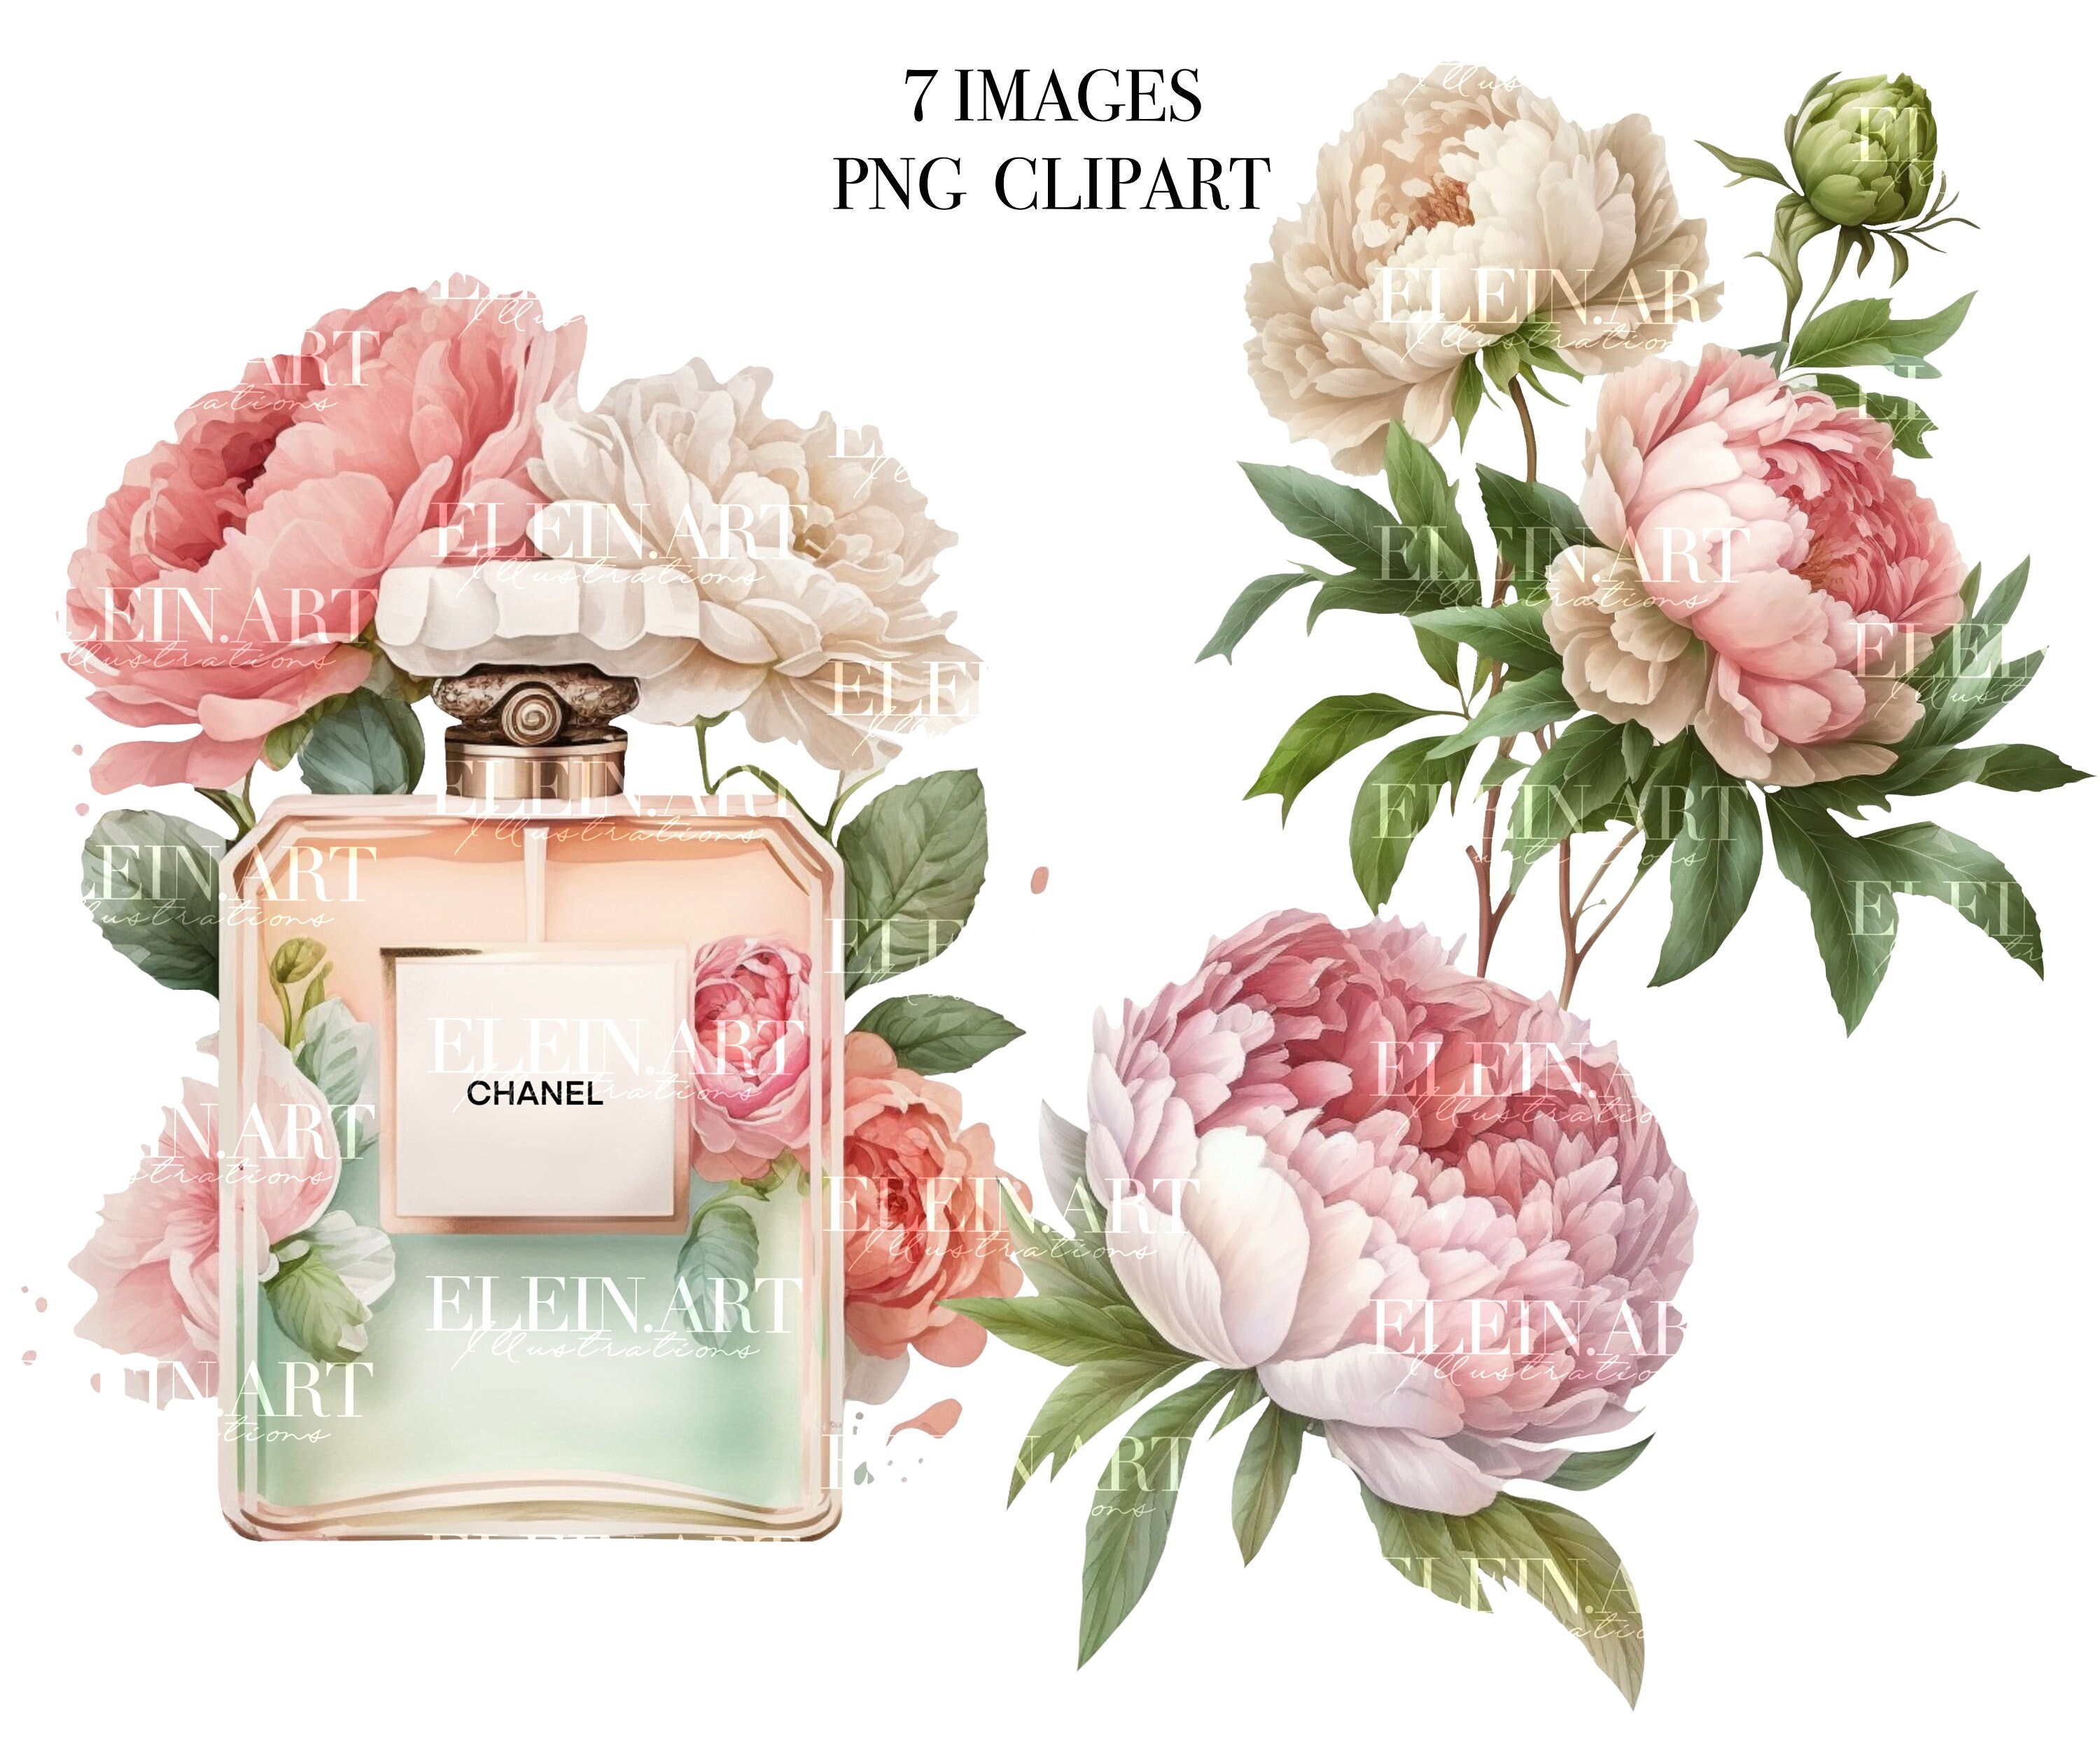 Oliver Gal 'Floral Perfume Peonies Tall' Fashion and Glam Wall Art